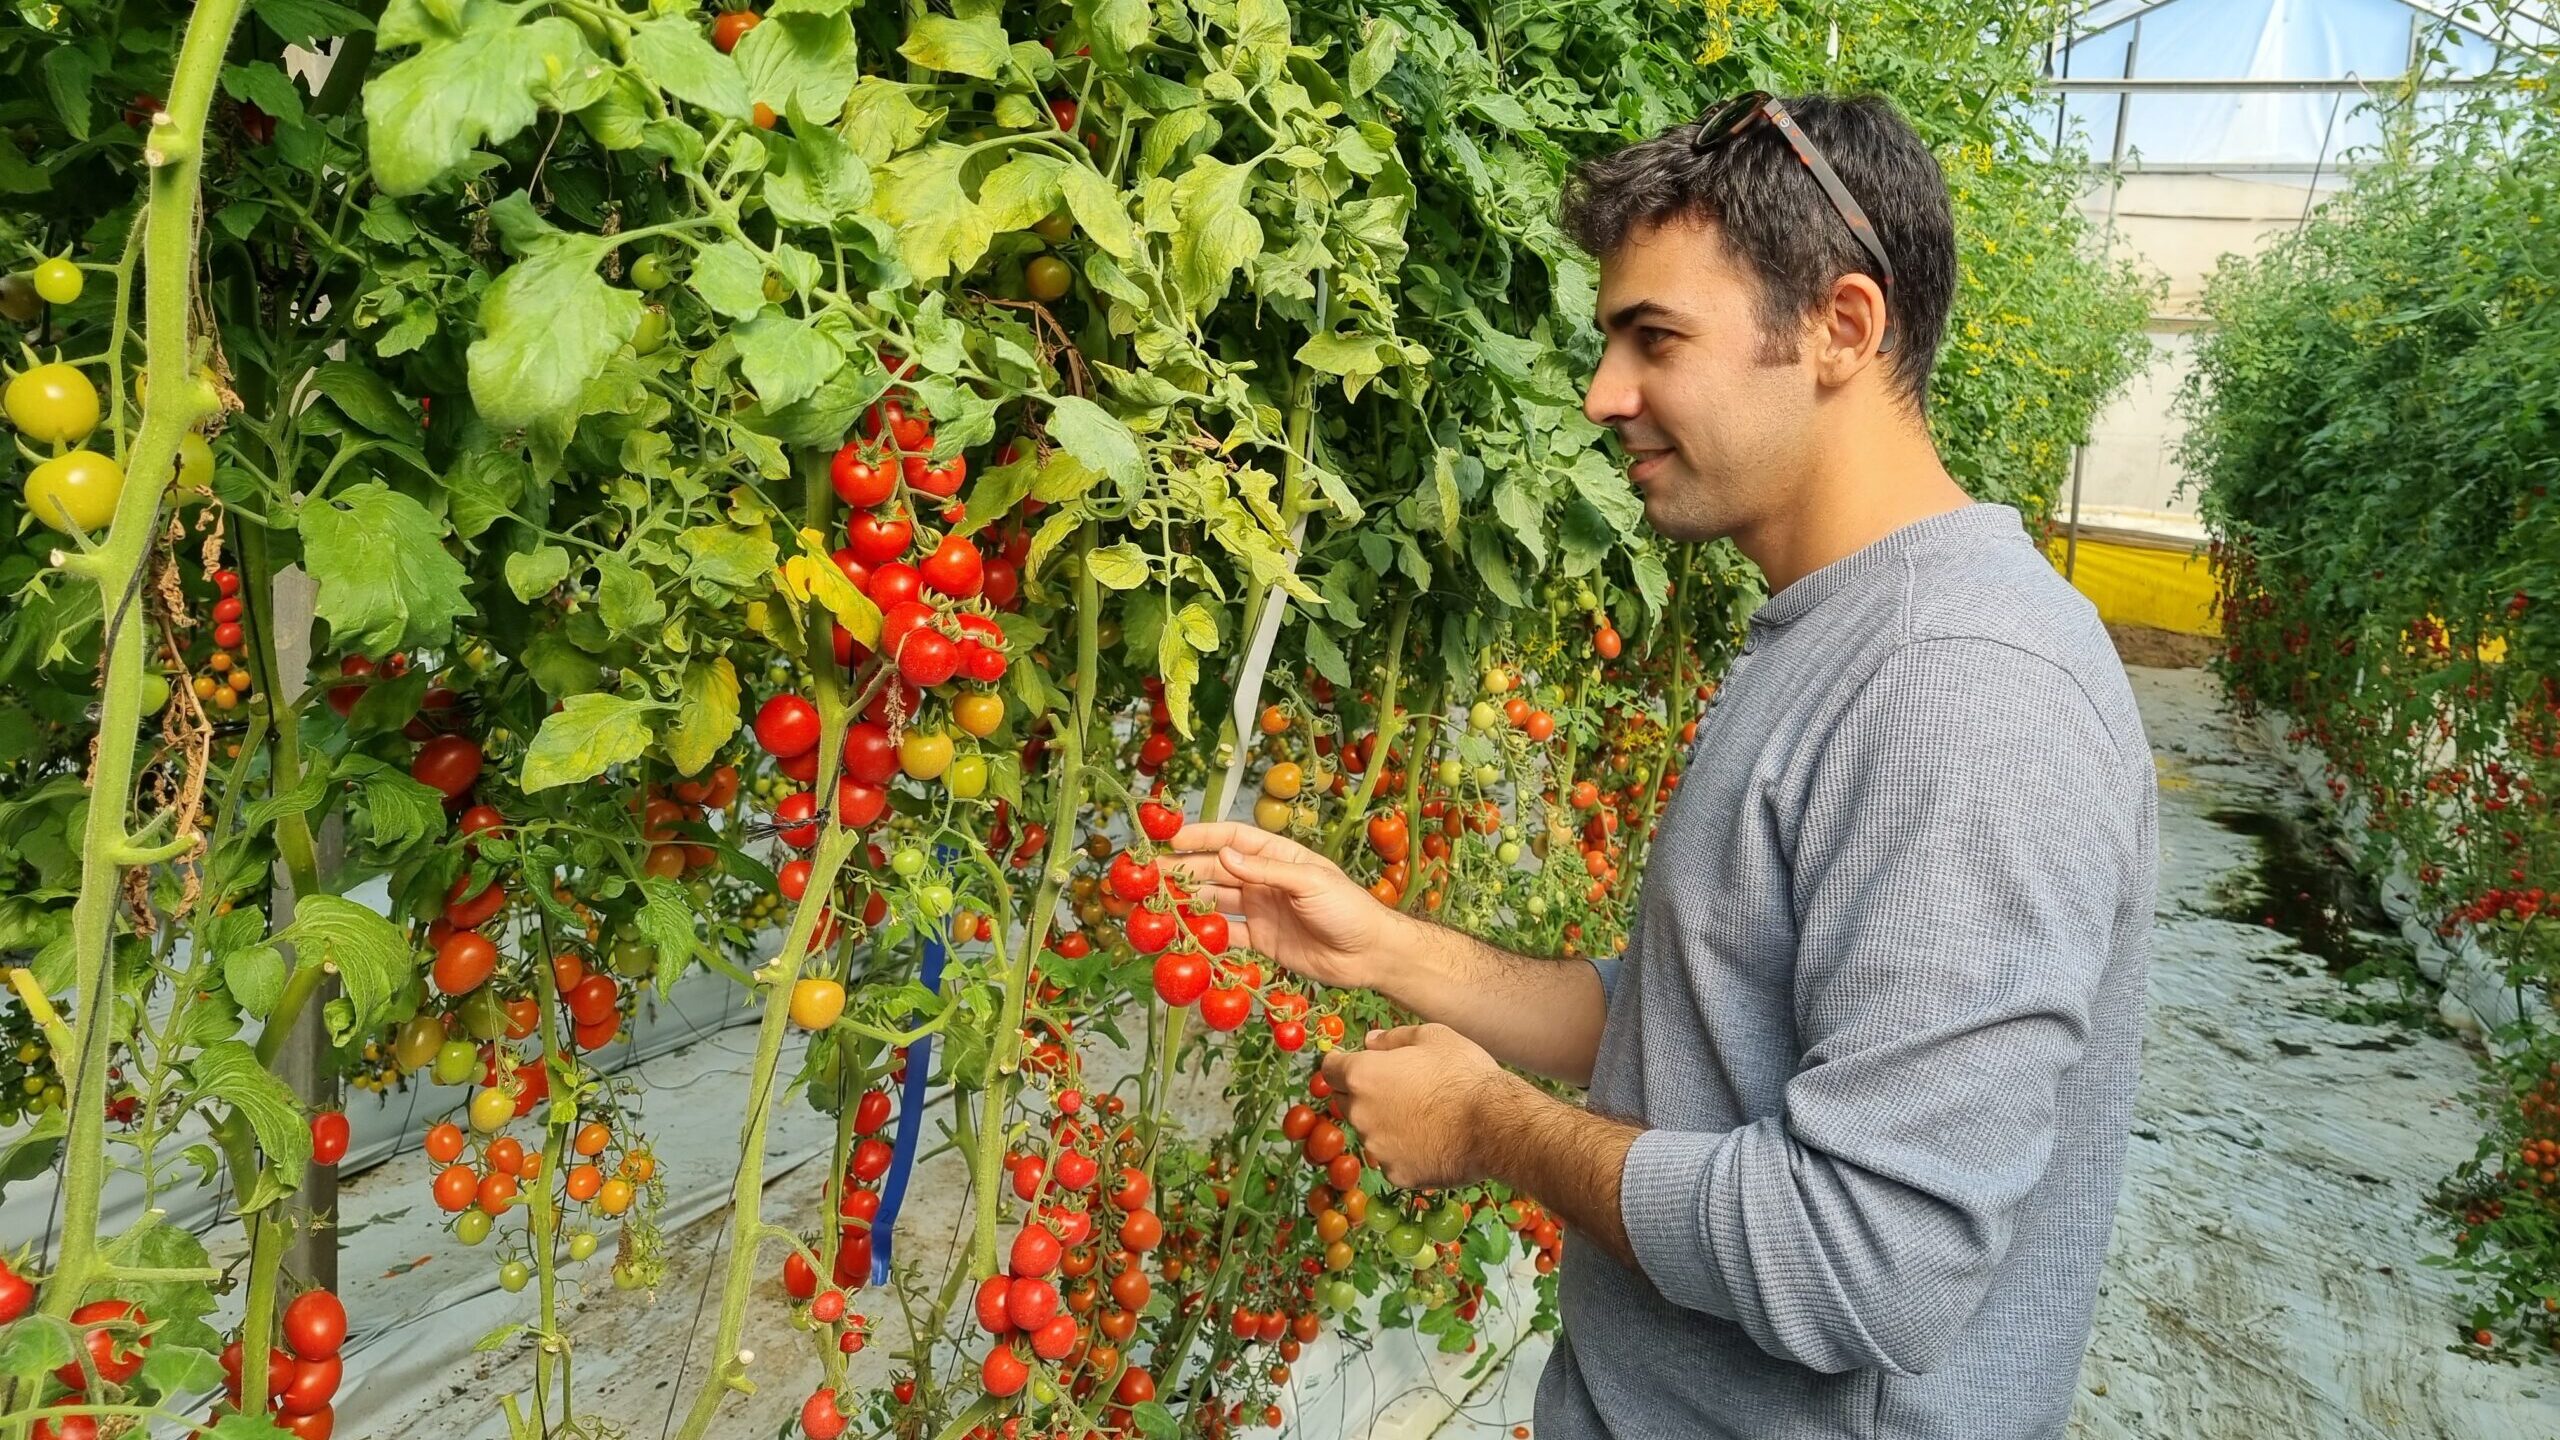 Israeli Scientists Develop Drought-Resistant Tomatoes in Response to Climate Change